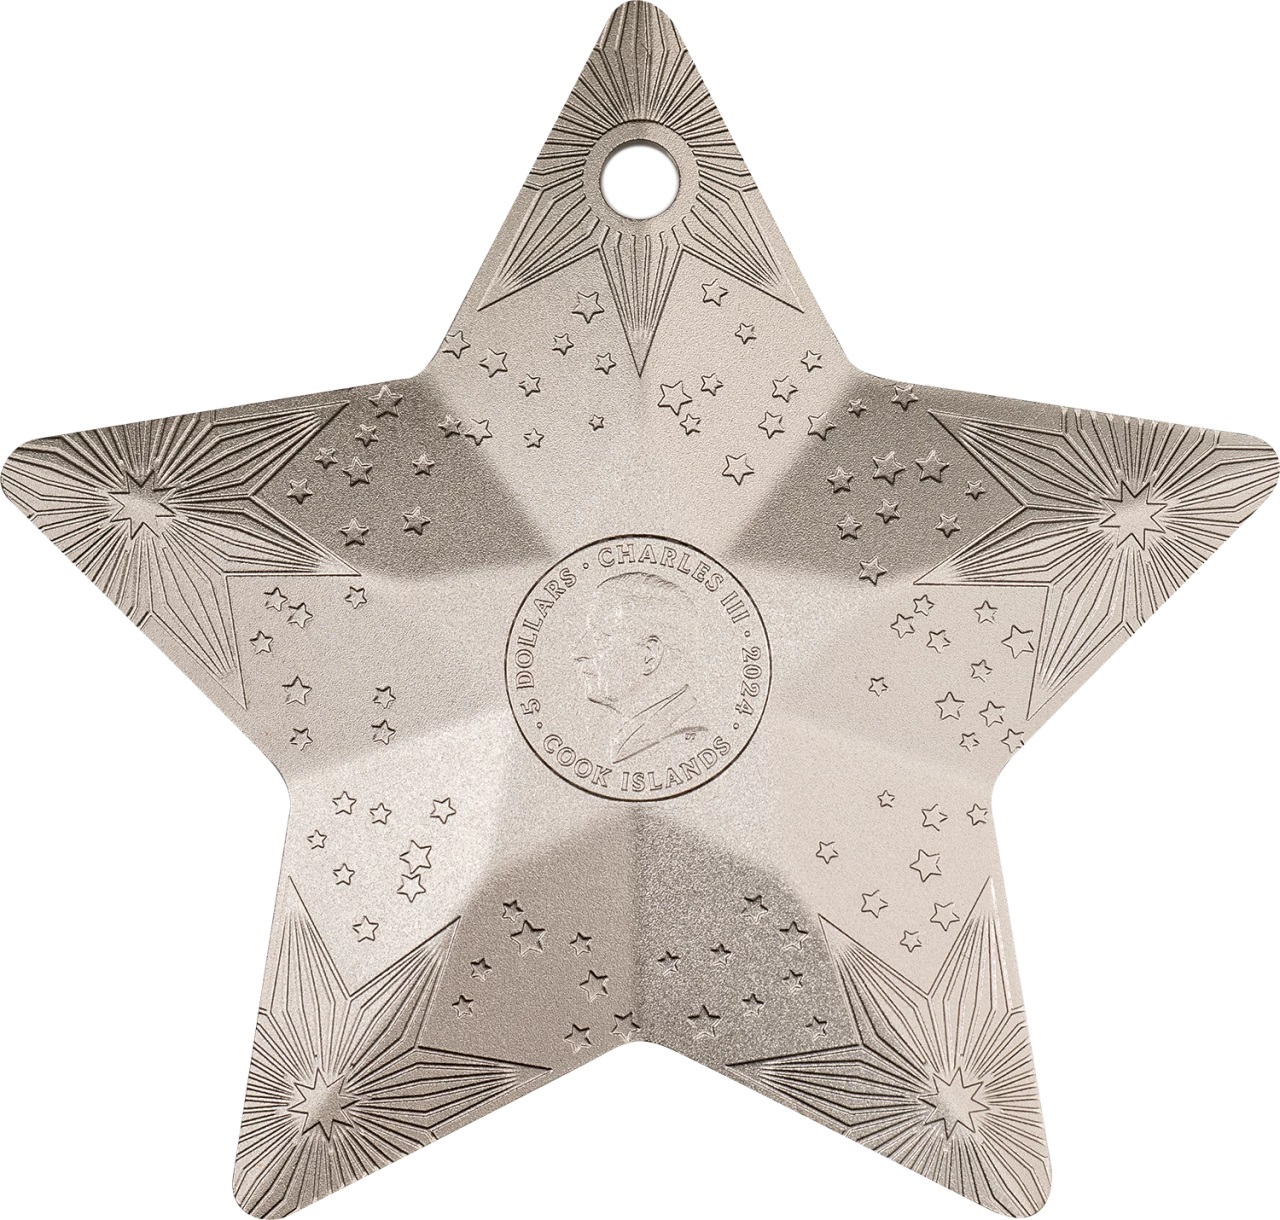 (W099.5.D.2024.30679) Cook Islands 5 Dollars Starry Sky 2024 - Silk finish silver Obverse (zoom)